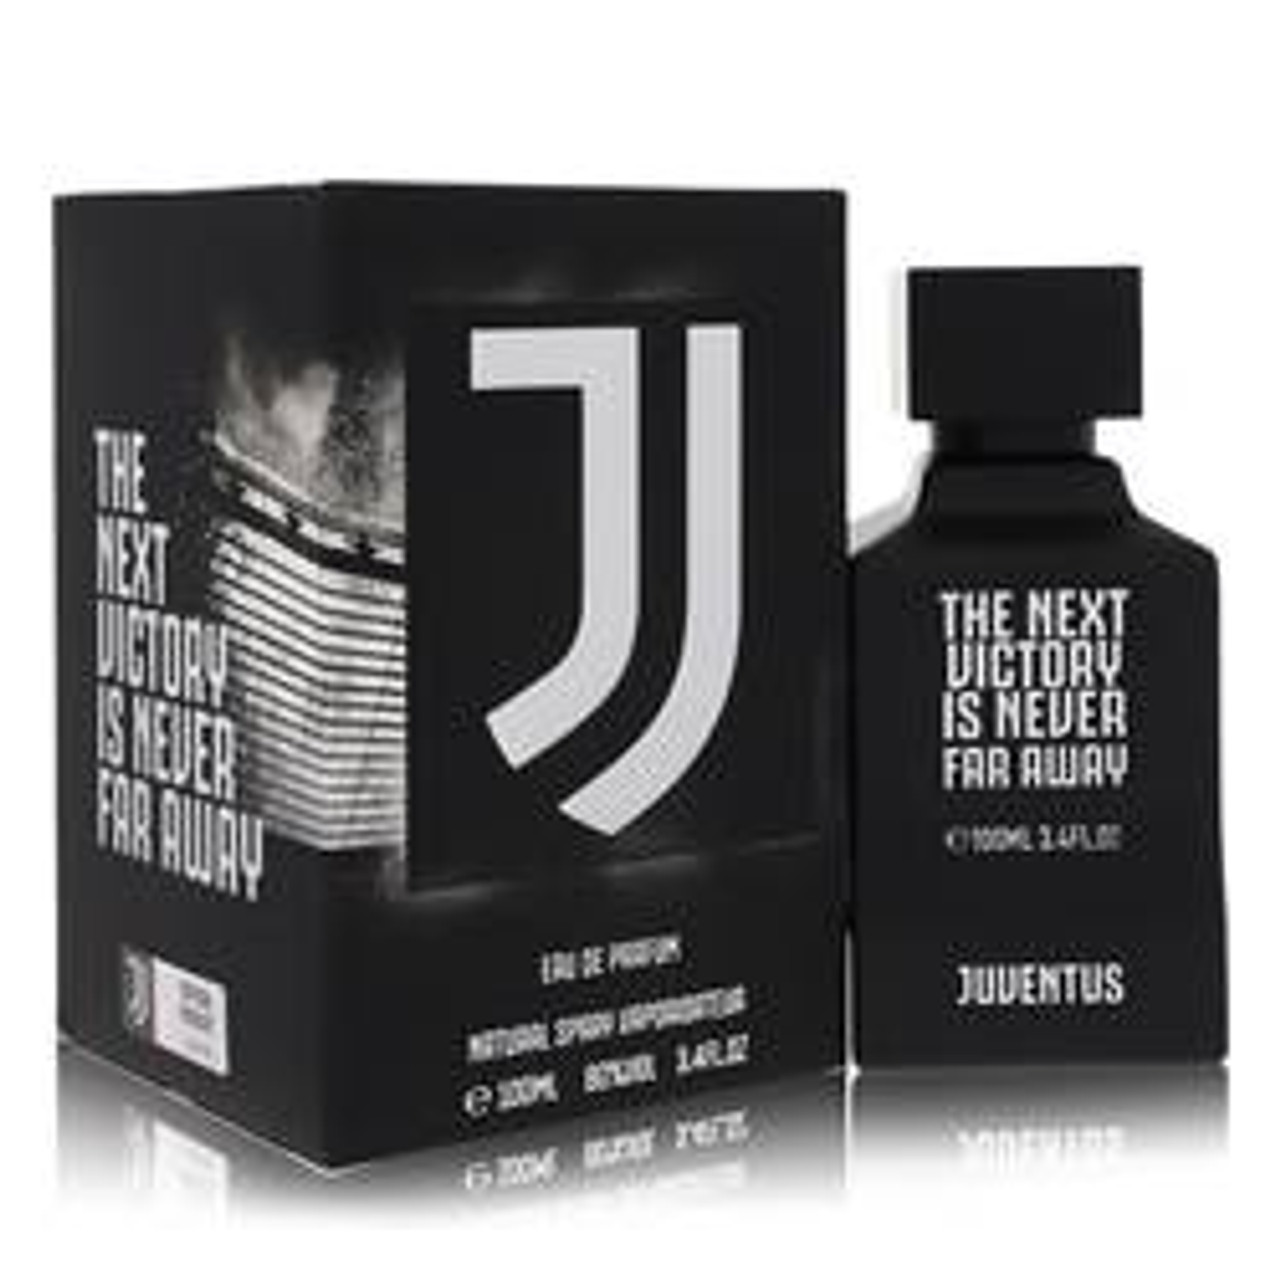 The Next Victory Is Never Far Away Cologne By Juventus Eau De Parfum Spray 3.4 oz for Men - [From 63.00 - Choose pk Qty ] - *Ships from Miami